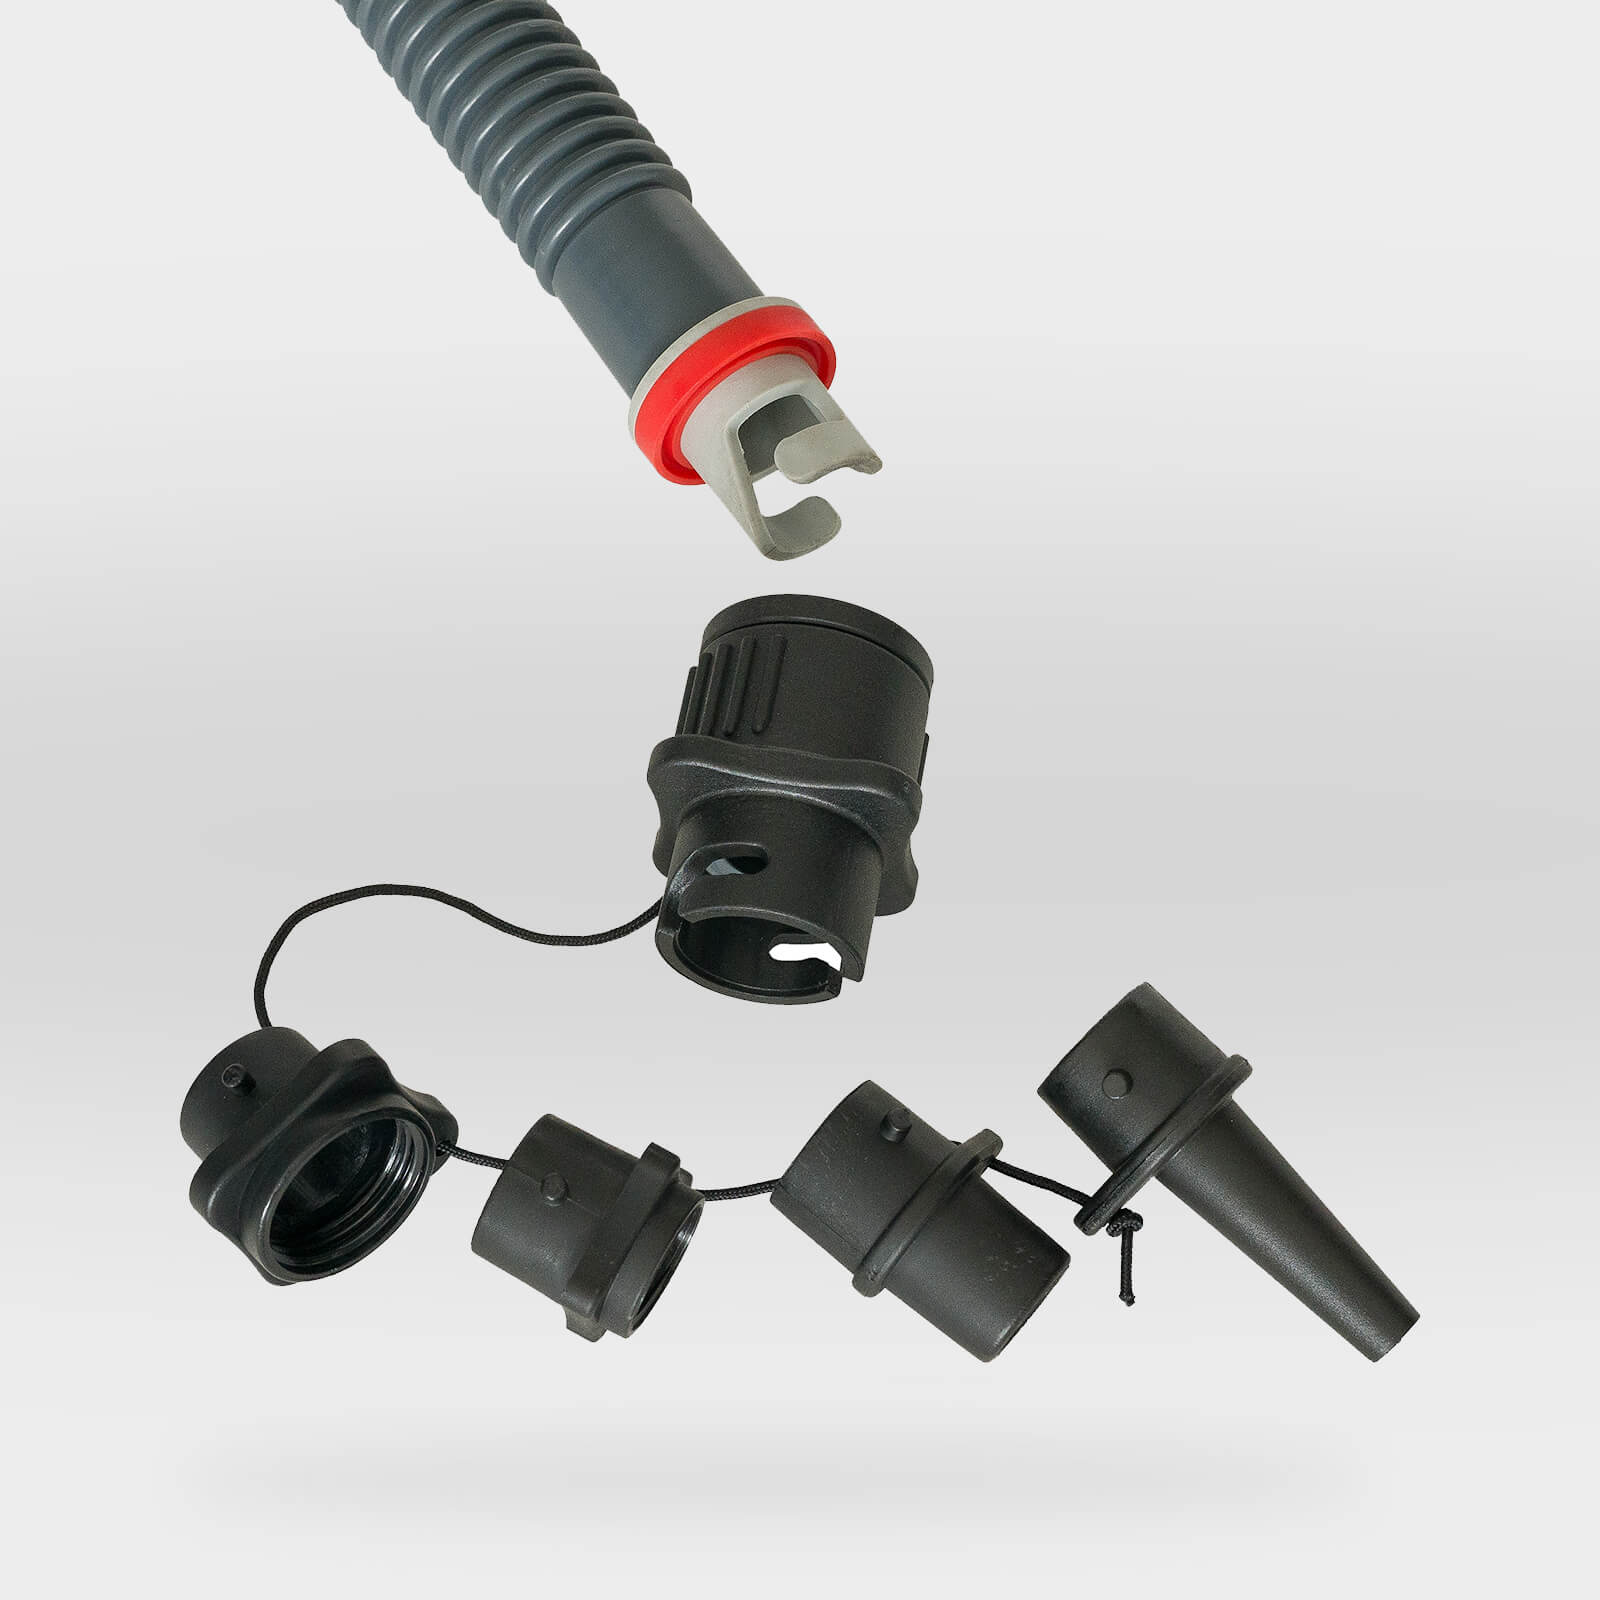 120v high volume air pump from MISSION with various attachments